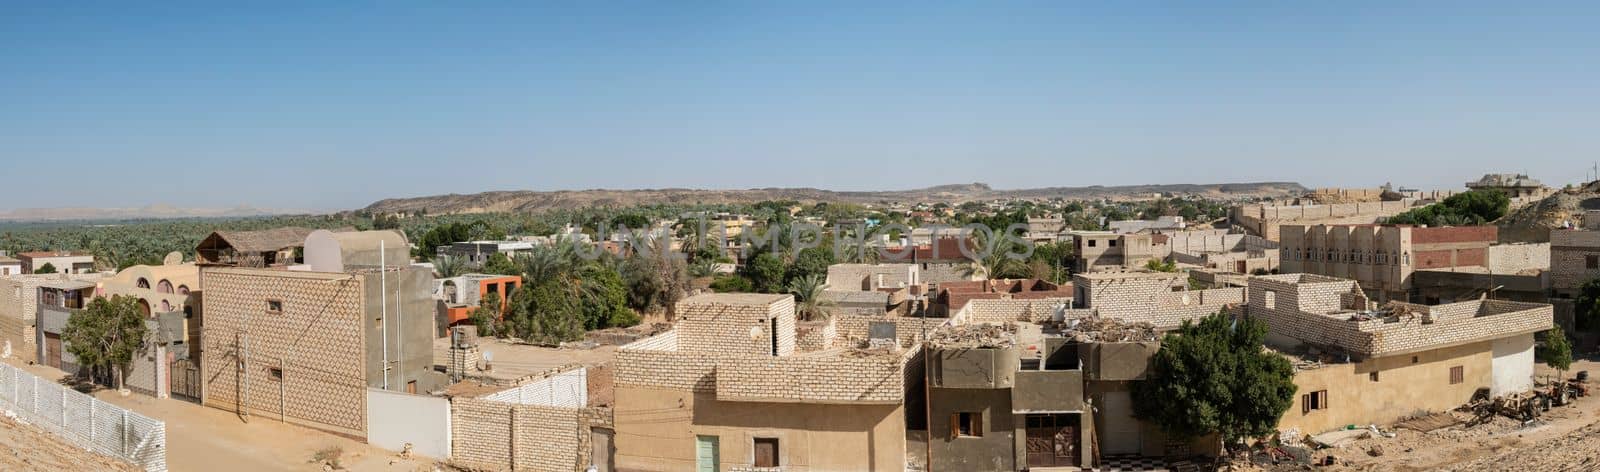 Panoramic view over remote african egyptian town with oasis and large date palm farm plantation